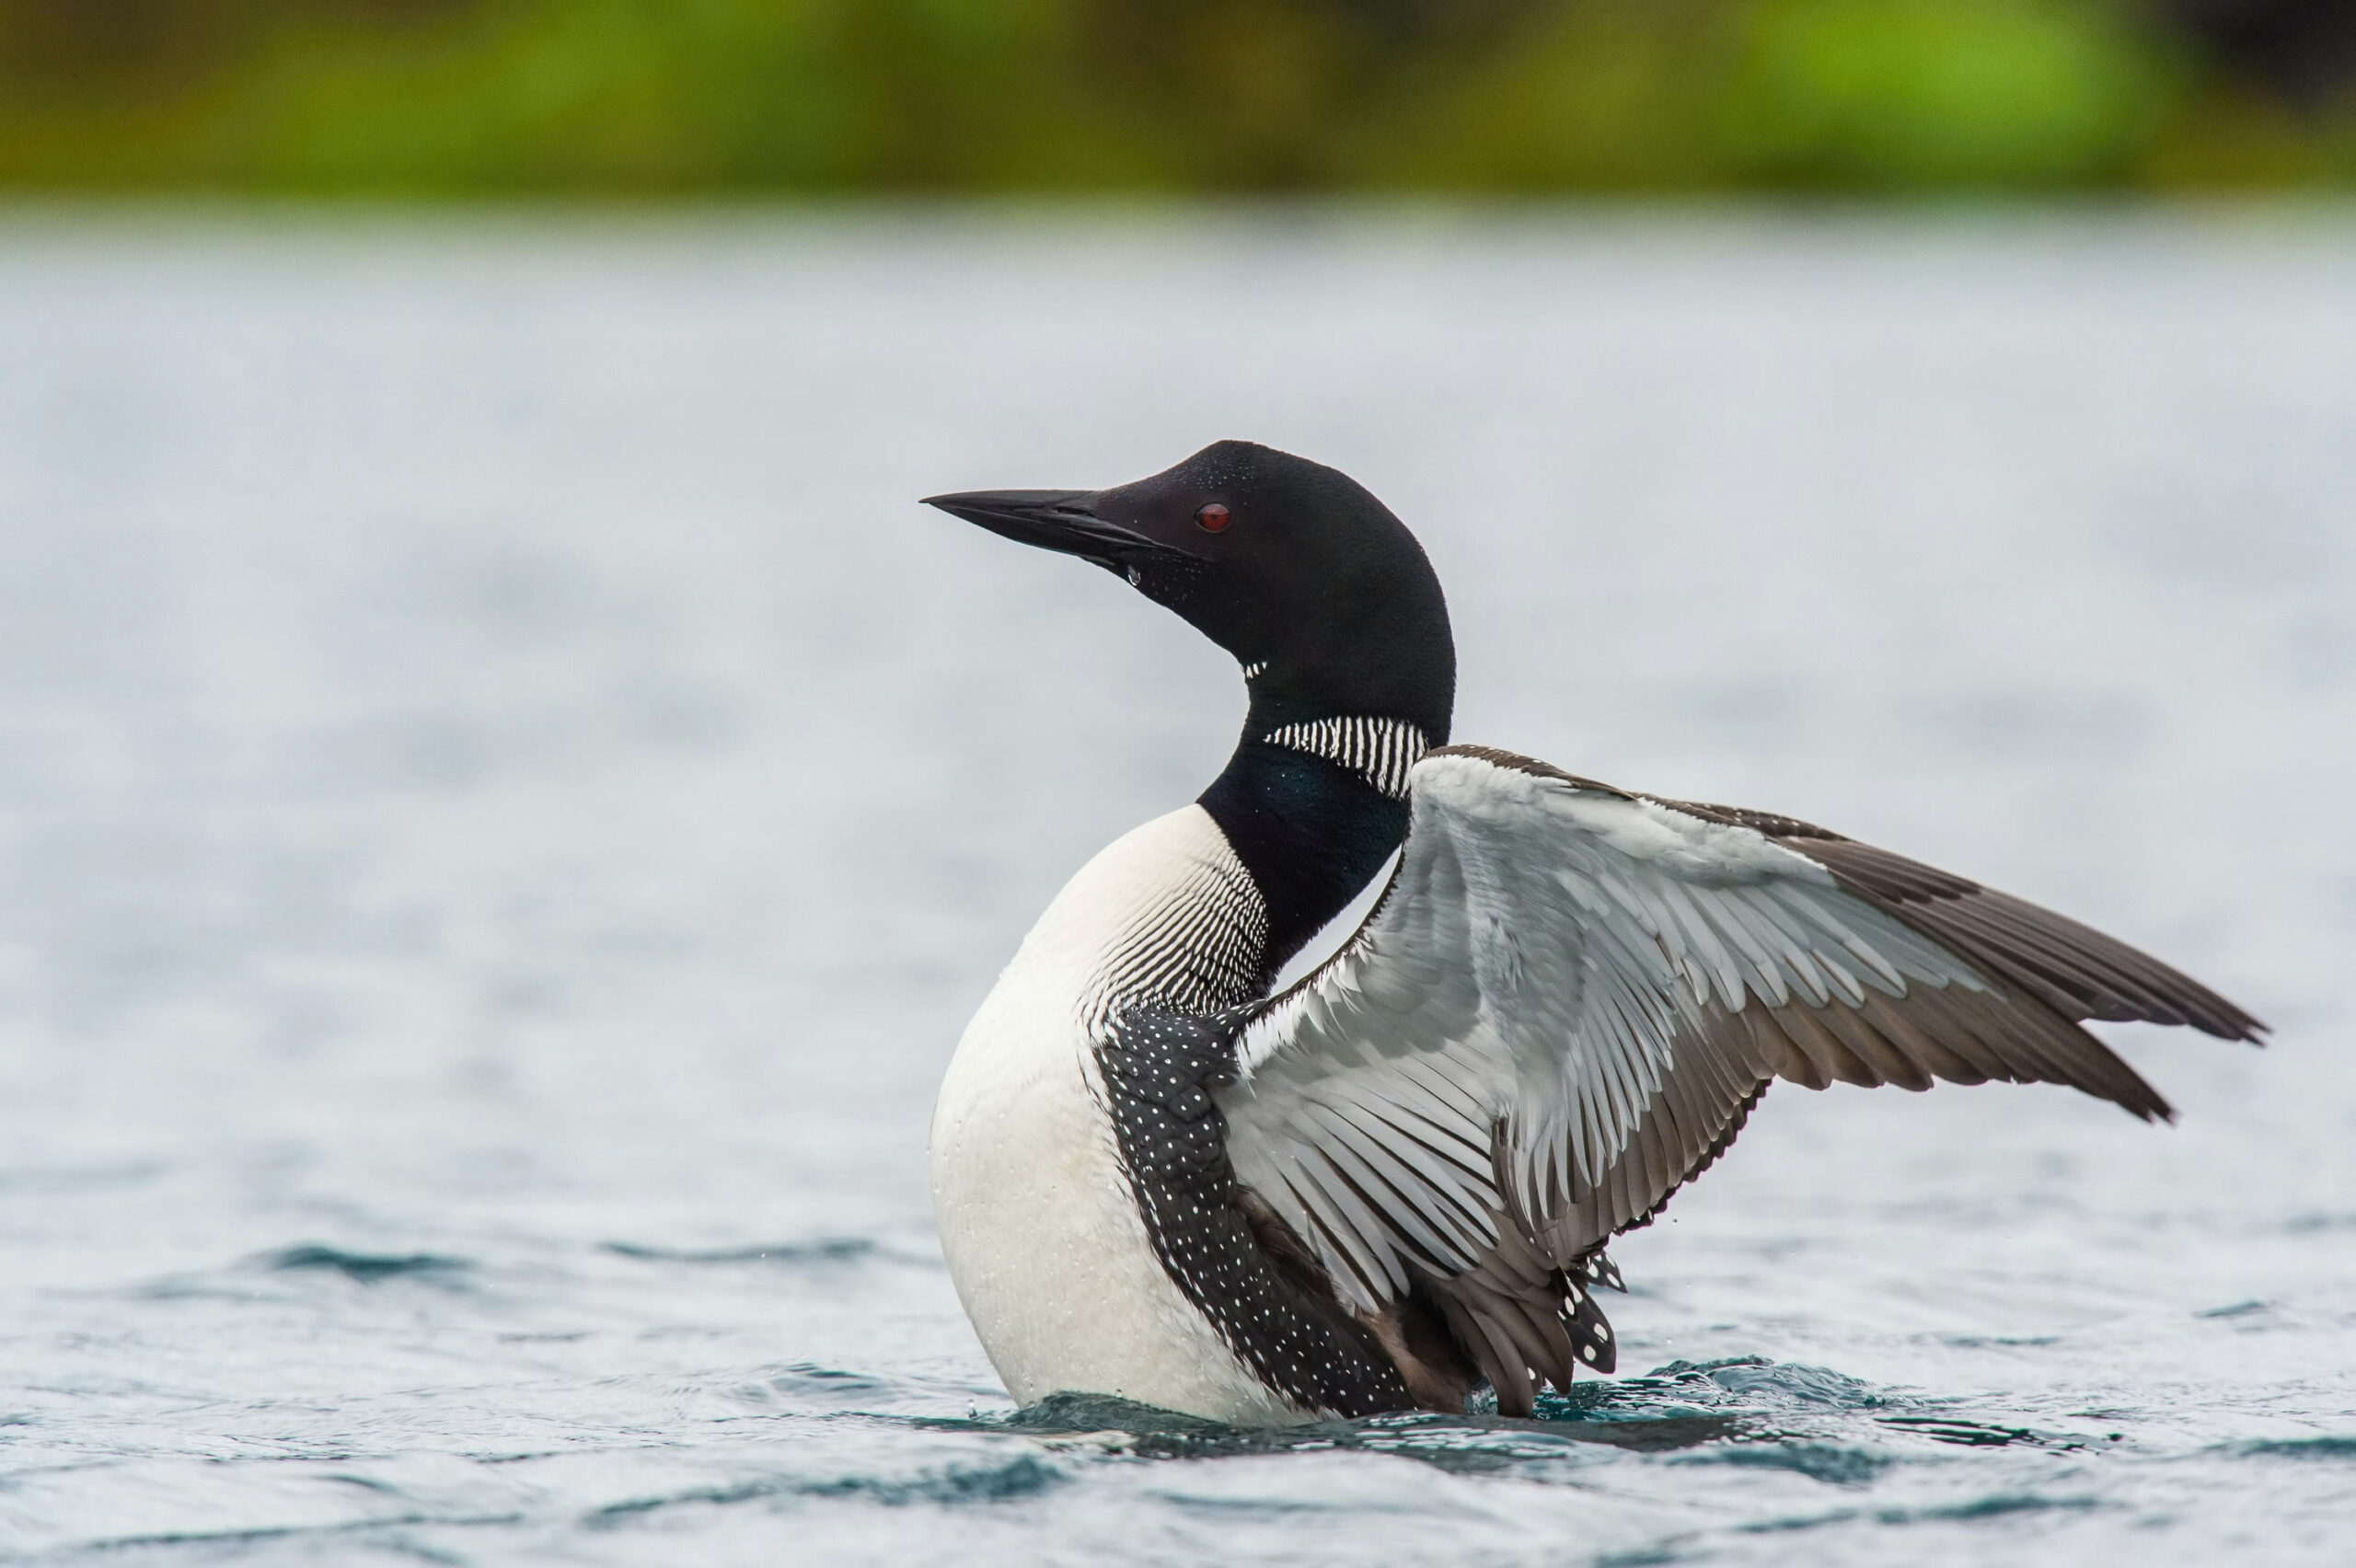 single loon on a lake flapping its wings